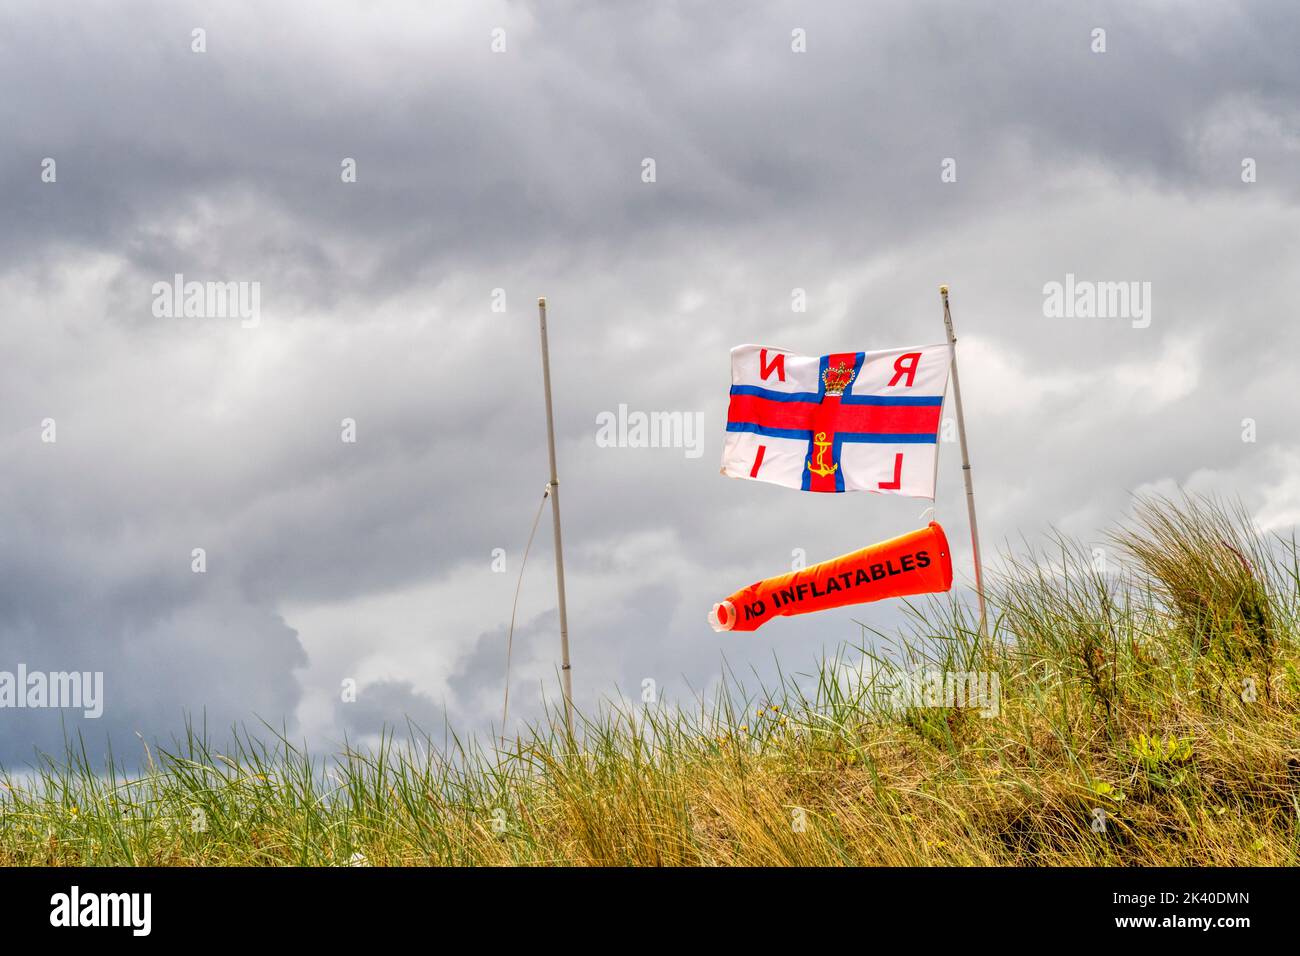 RNLI No Inflatables flag flying at beach. Stock Photo